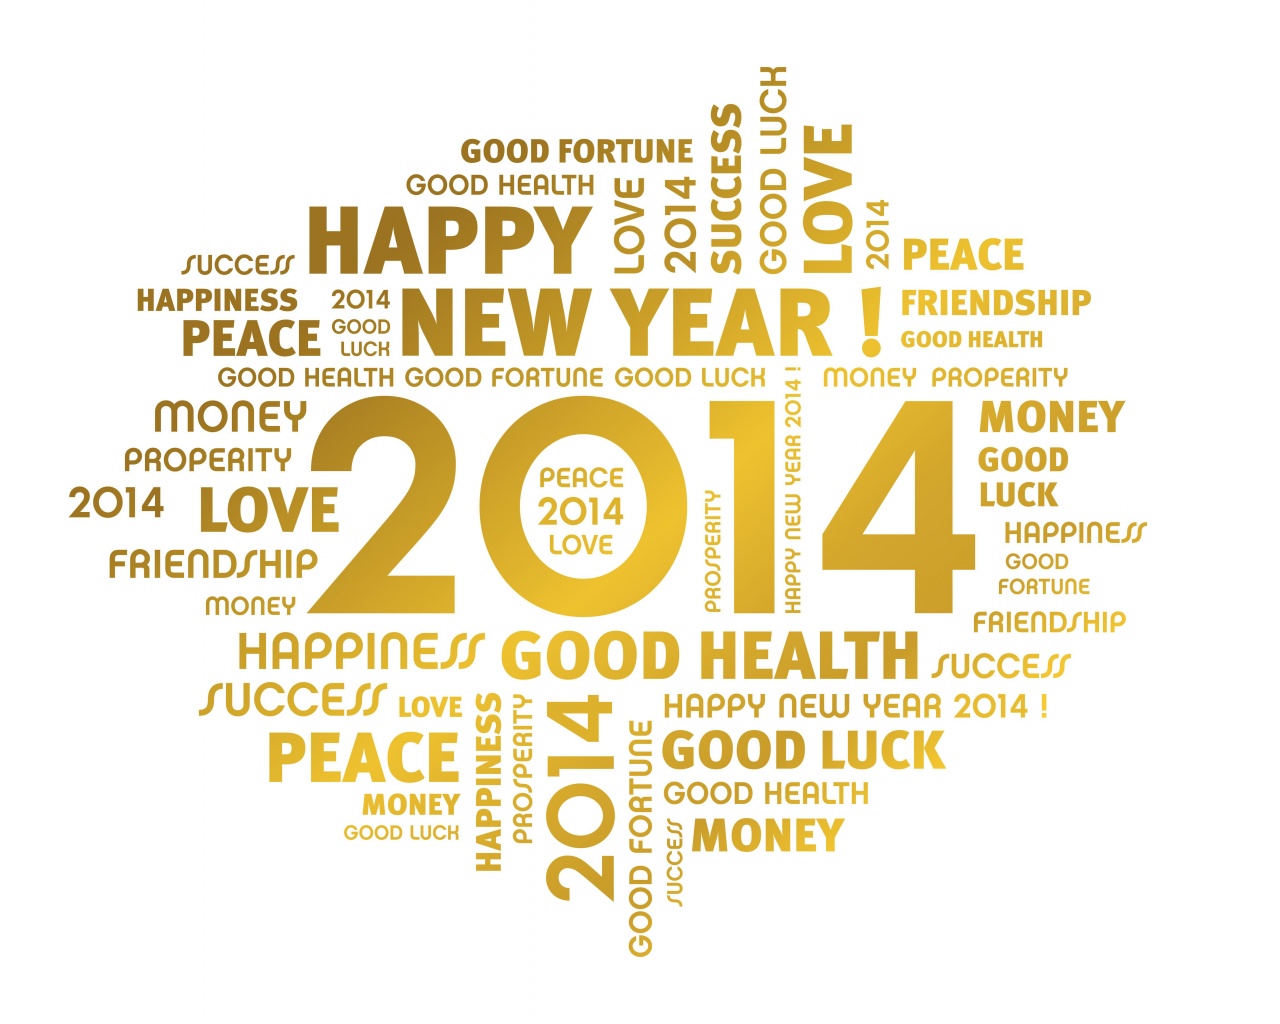 Best Wishes For The New Year 2014